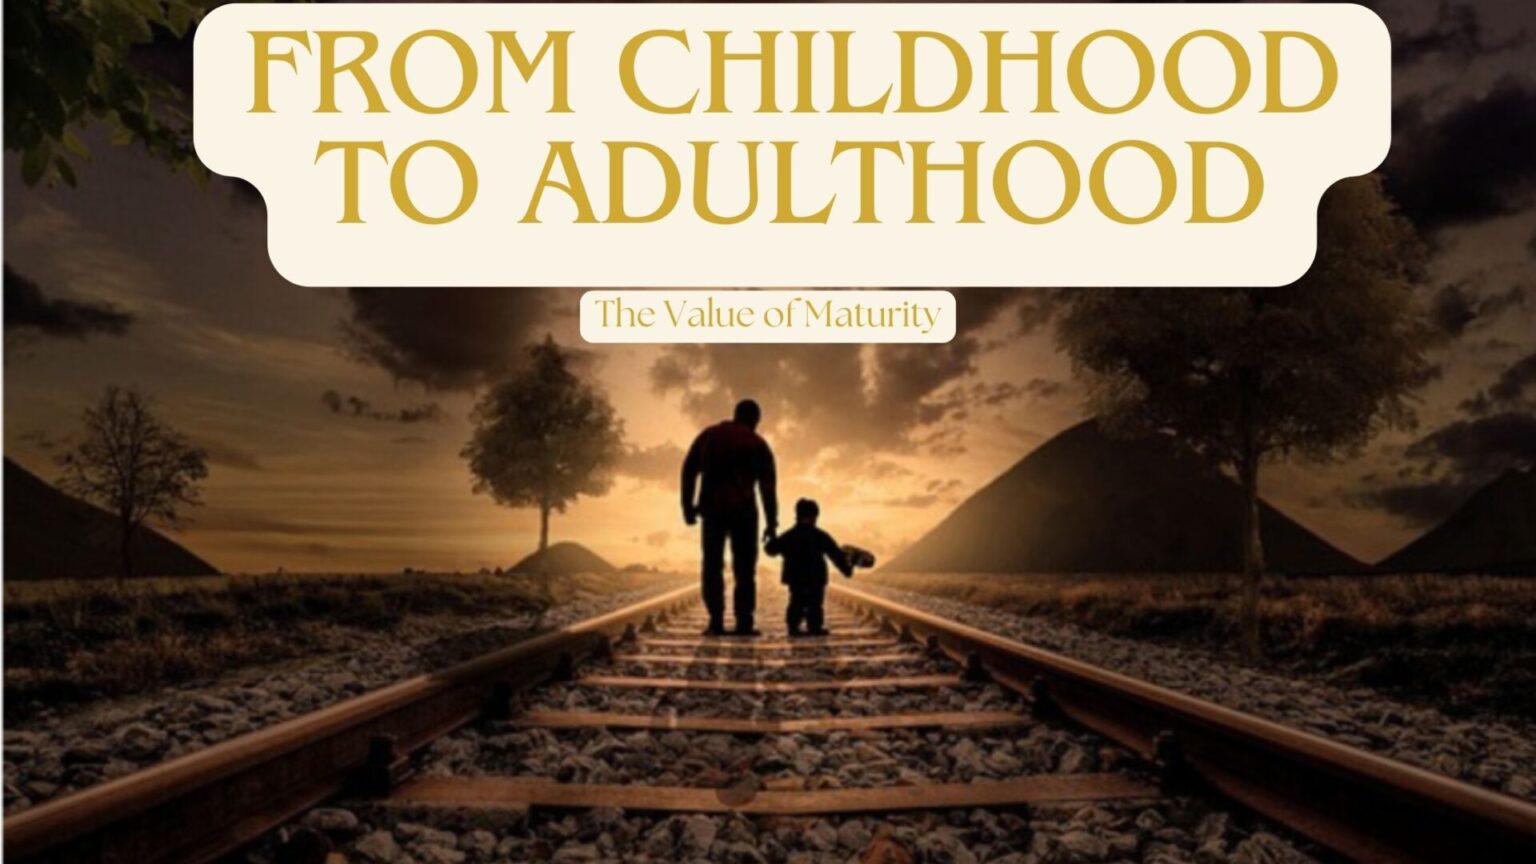 Embracing Maturity: A Journey from Childhood to Adulthood